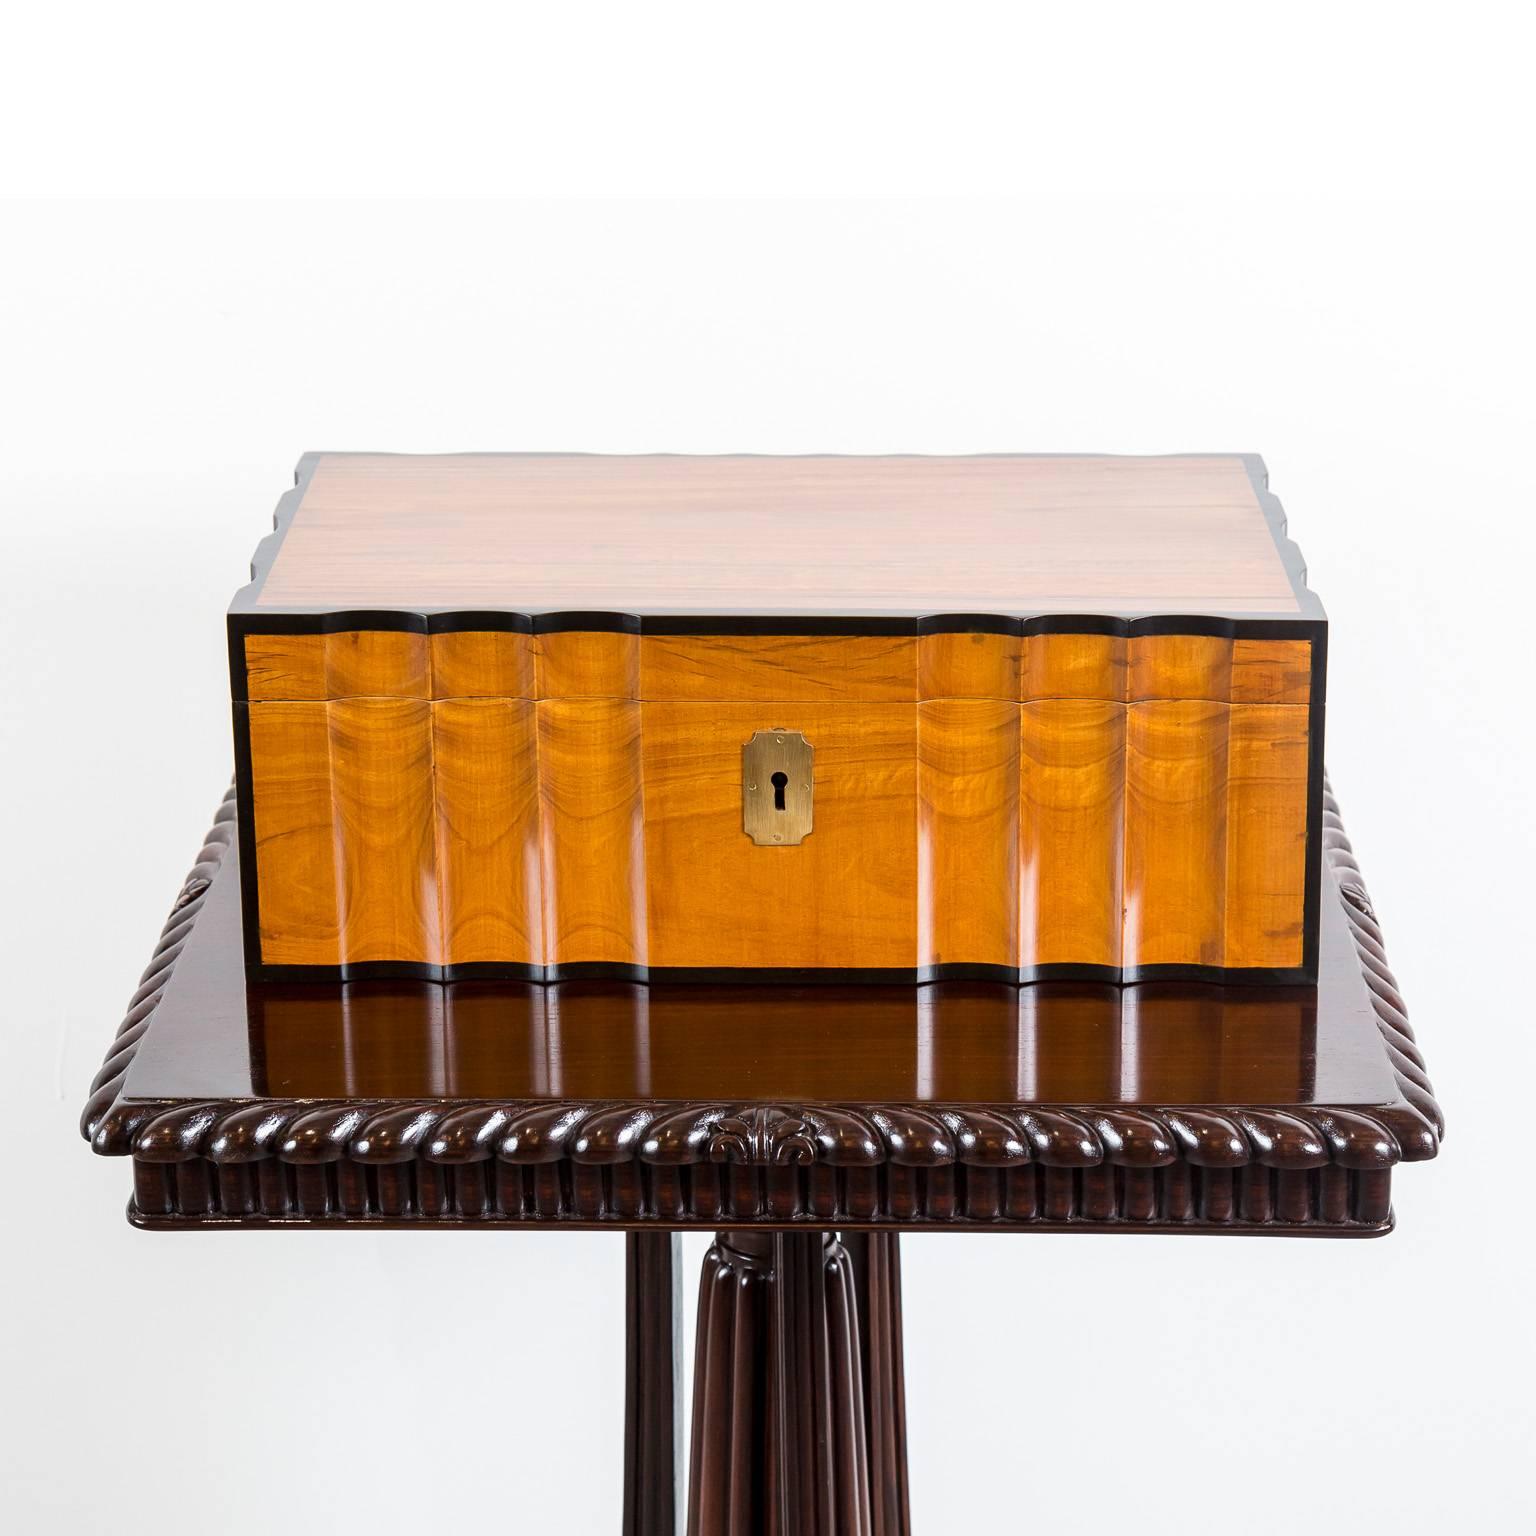 An unusual Dutch colonial satinwood writing box with a brass escutcheon to the front and brass carrying handles on the sides. It has a beautiful serpentine almost wave-like shape on all four sides. It features banding of nicely contrasting ebony on